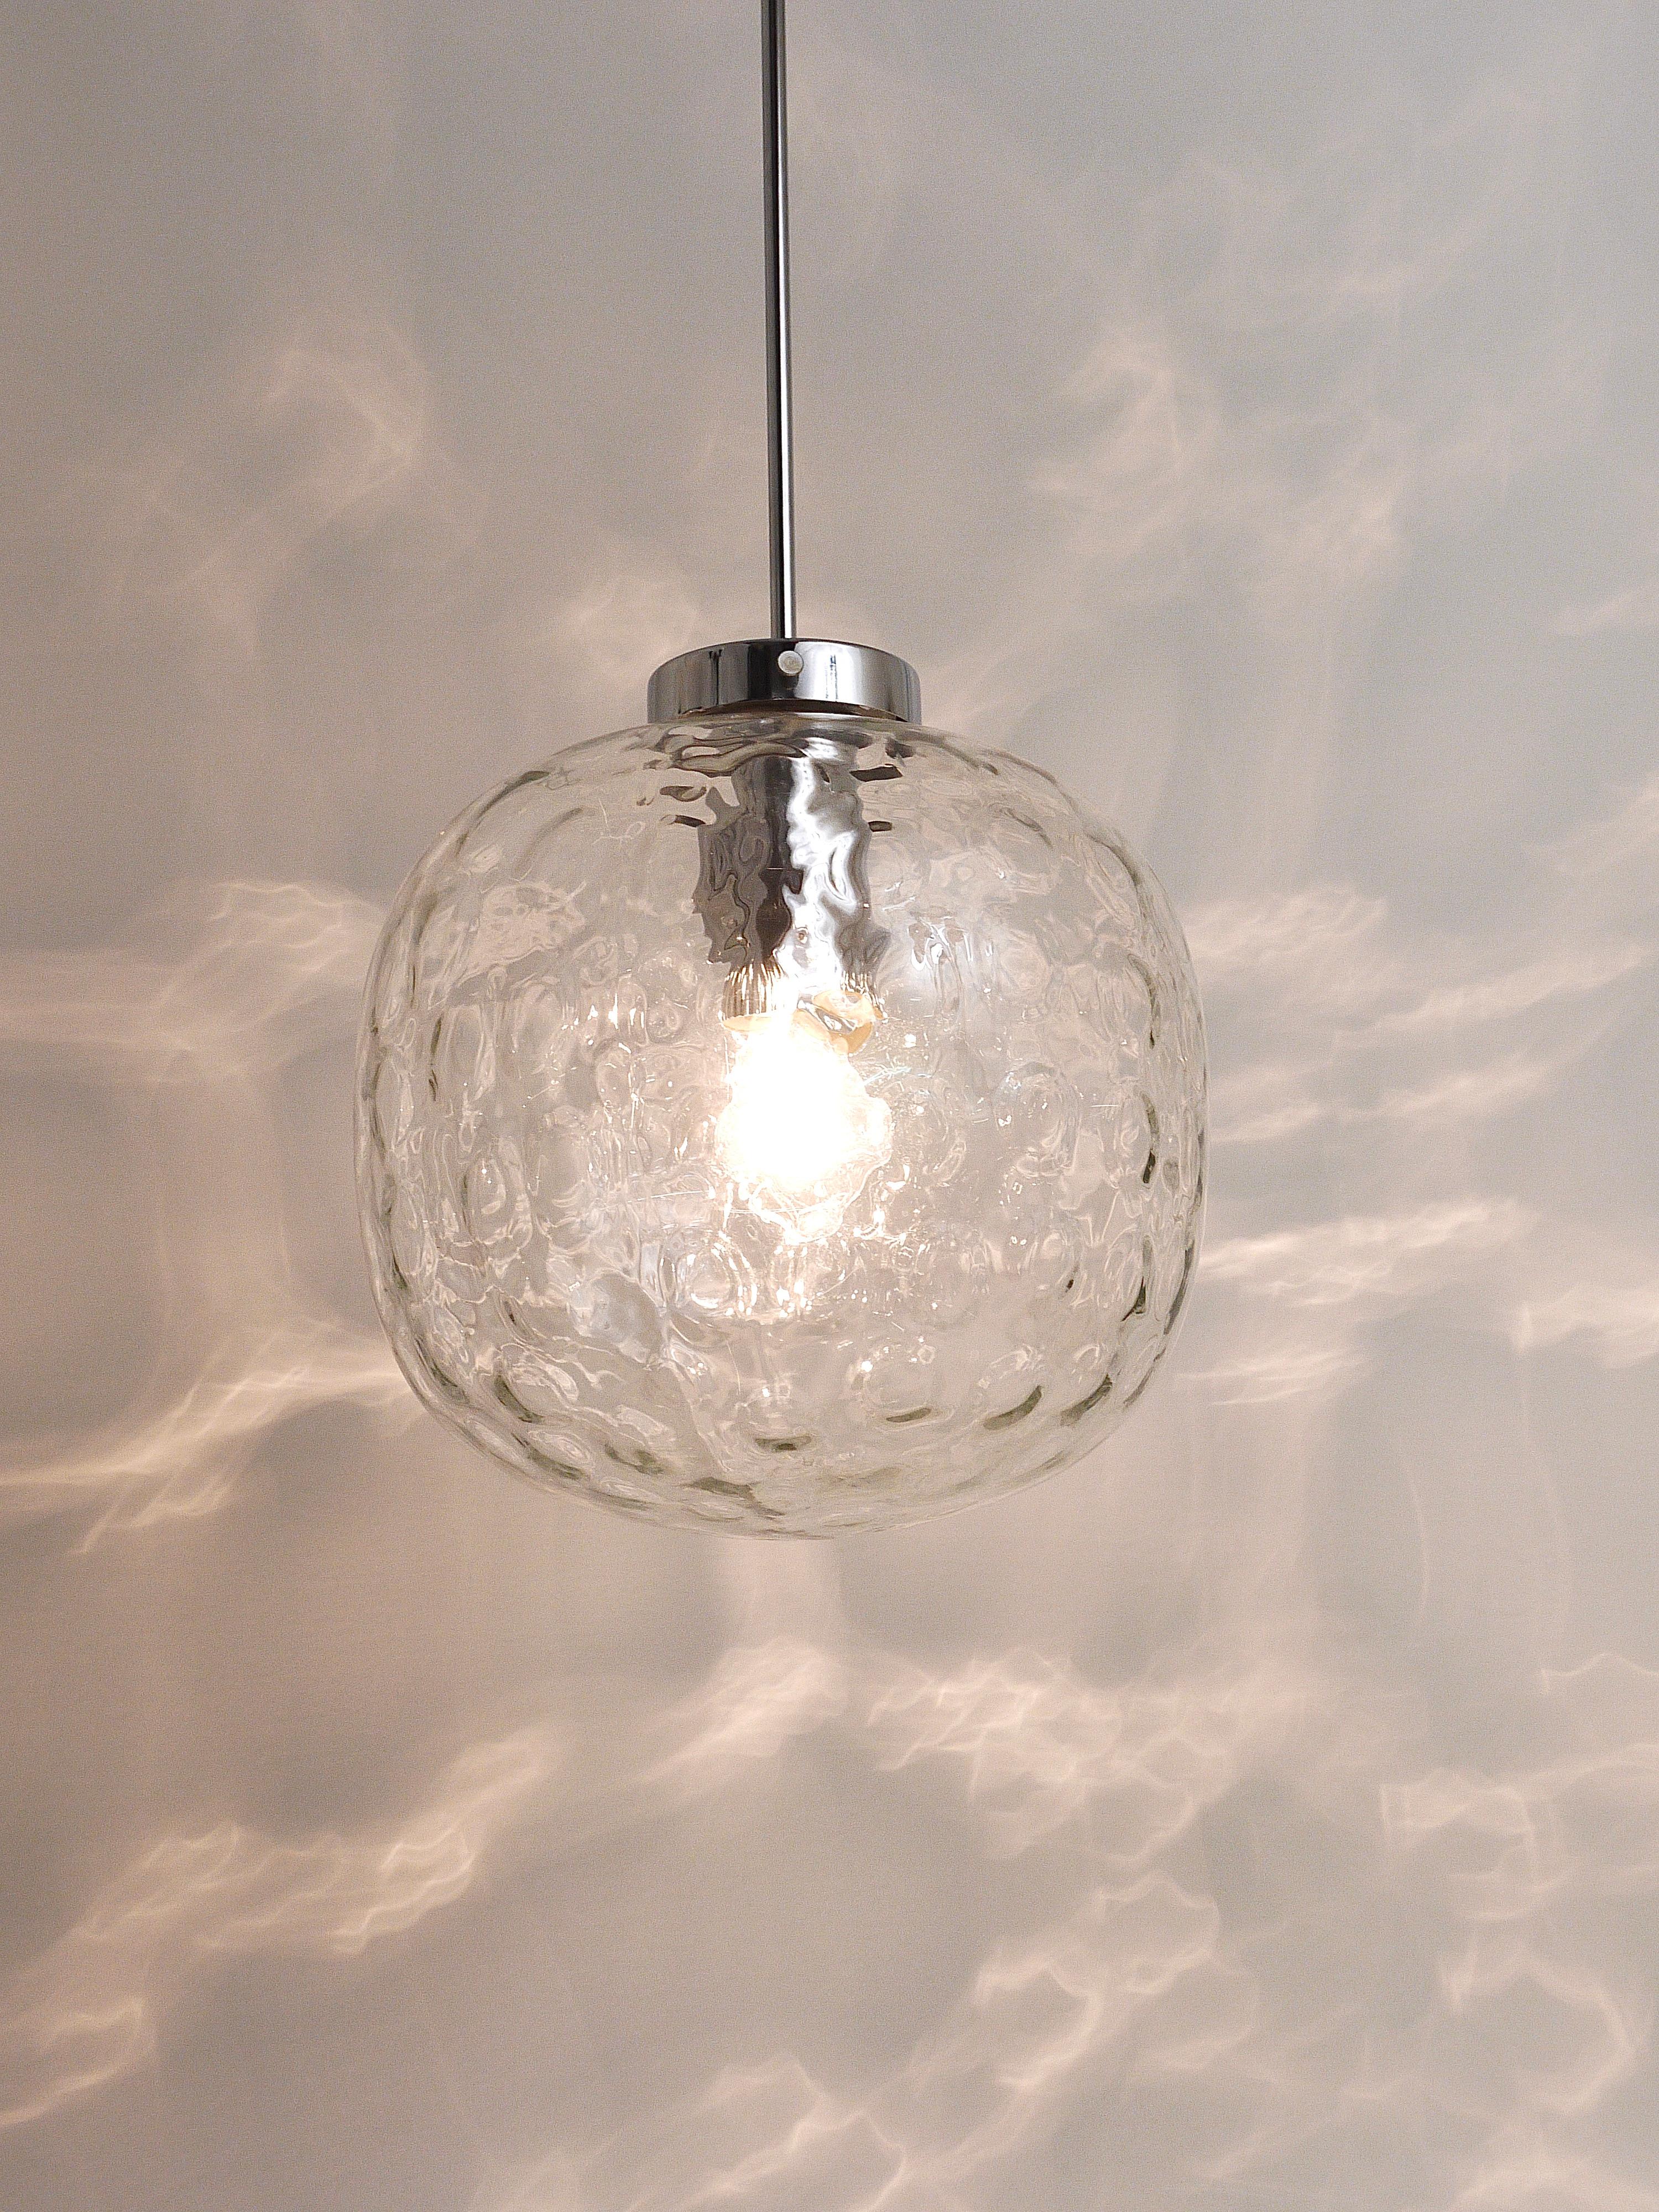 Large Bubble Melting Glass and Chrome Globe Pendant Lamp, Germany, 1970s For Sale 12